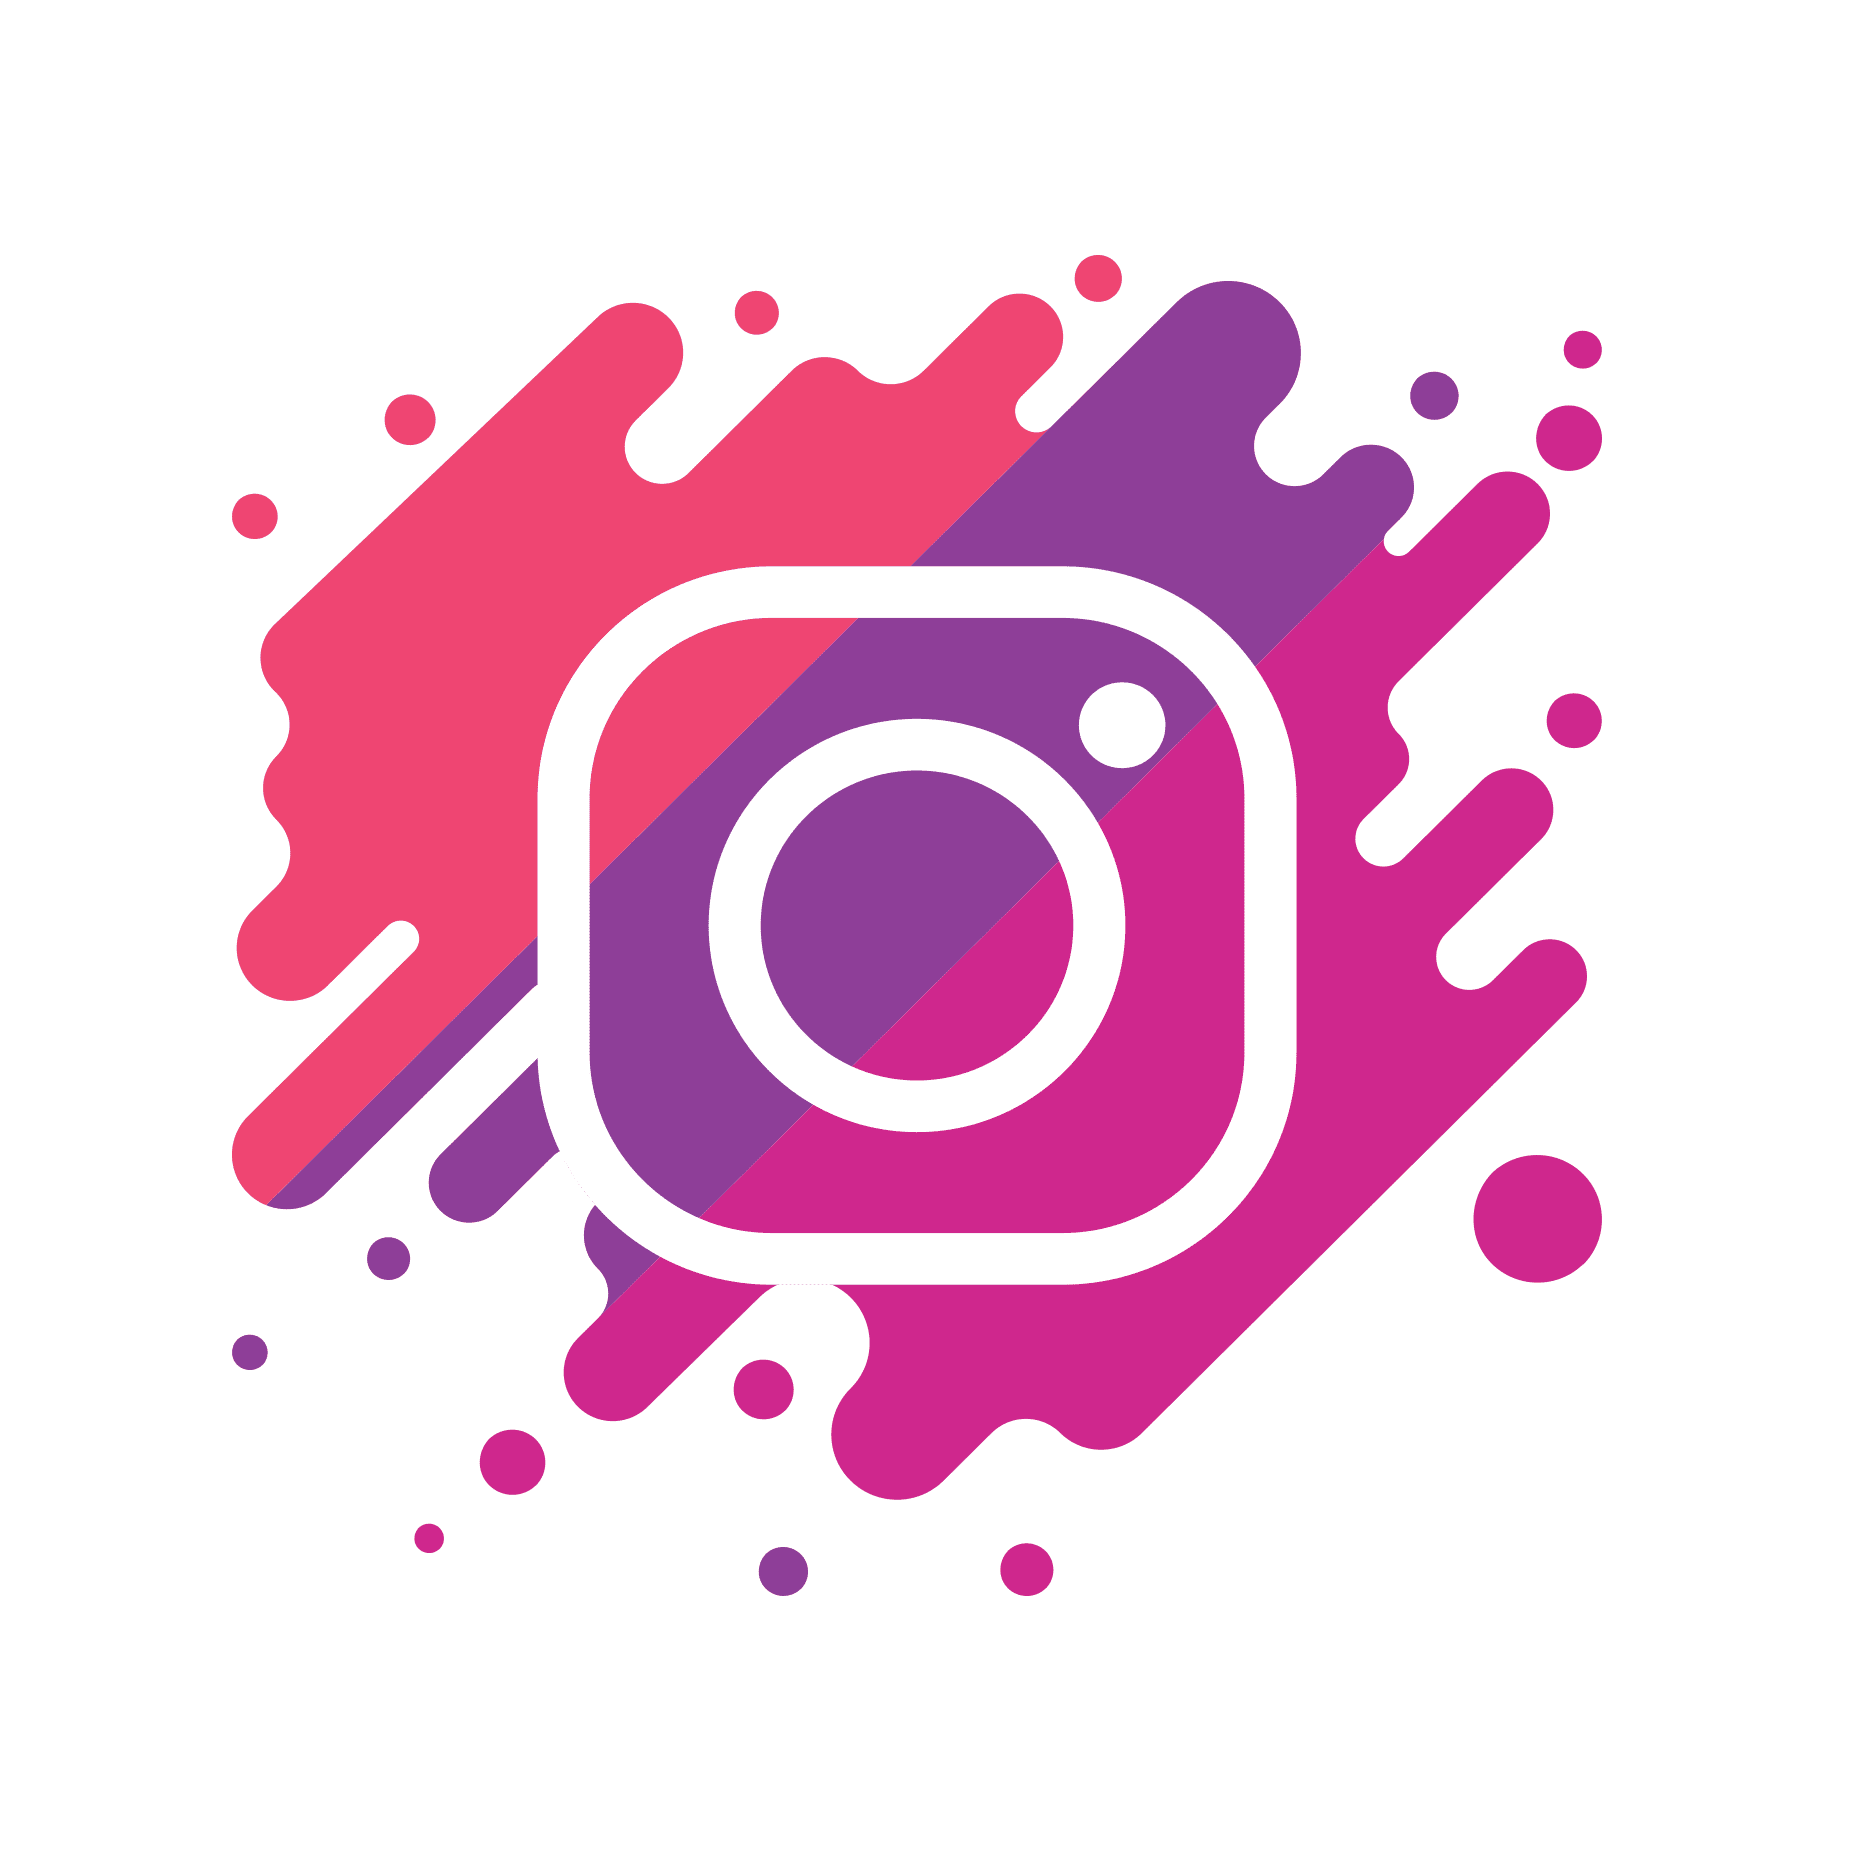 Buy Instagram Followers Australia - 100% Real and Active